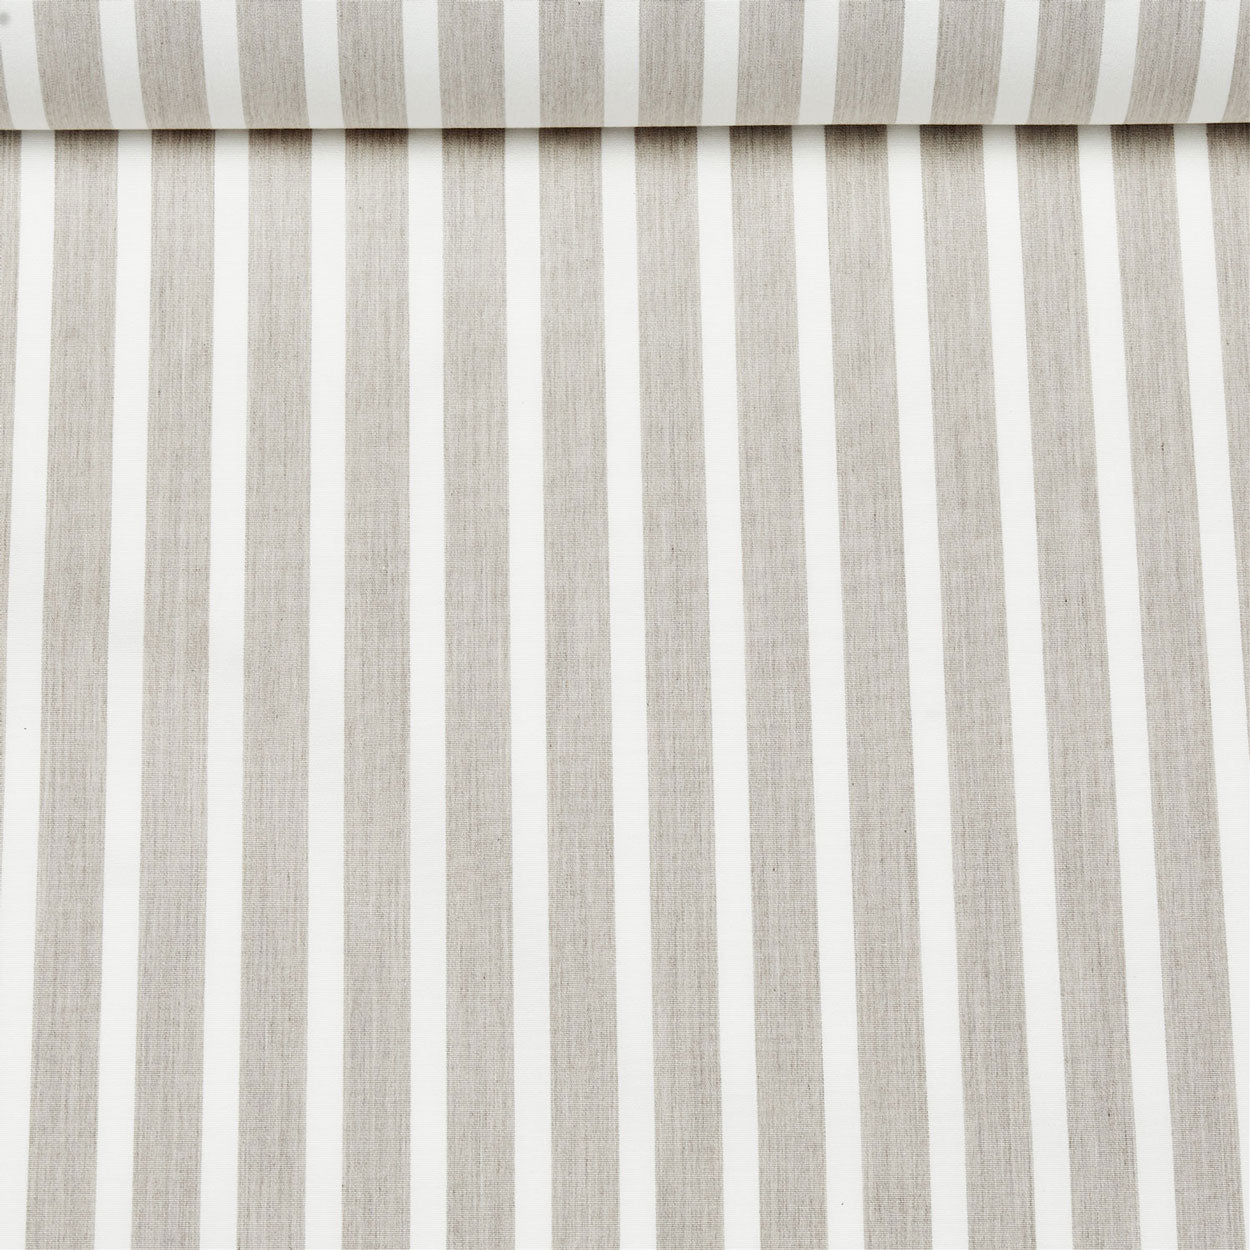 A birds eye view of a beige and white striped performance fabric for a beach float for adults.